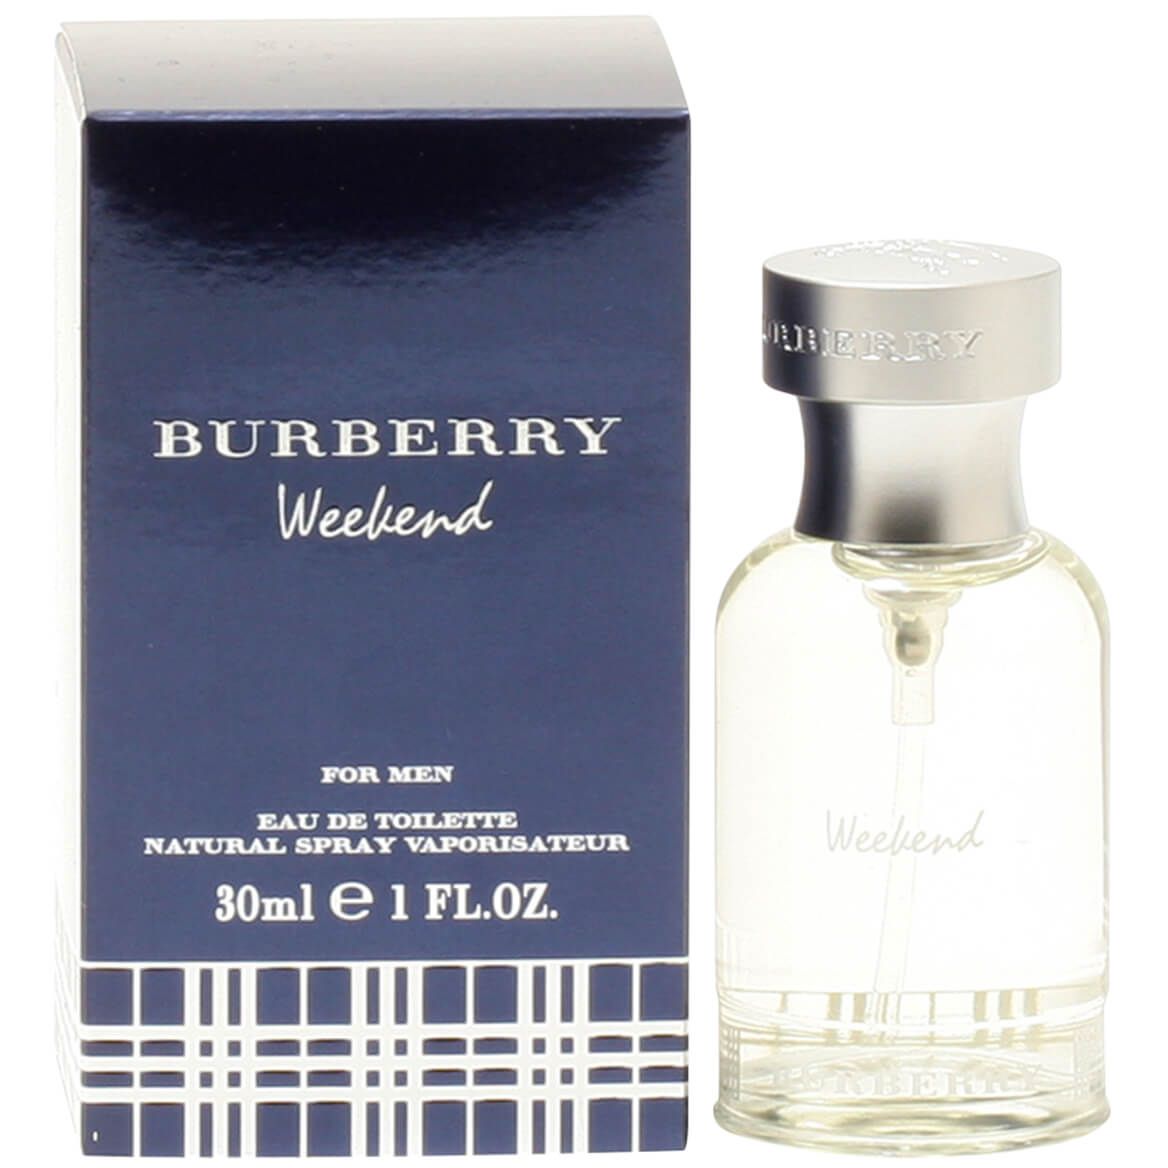 Burberry Weekend For Men, EDT Spray + '-' + 352174